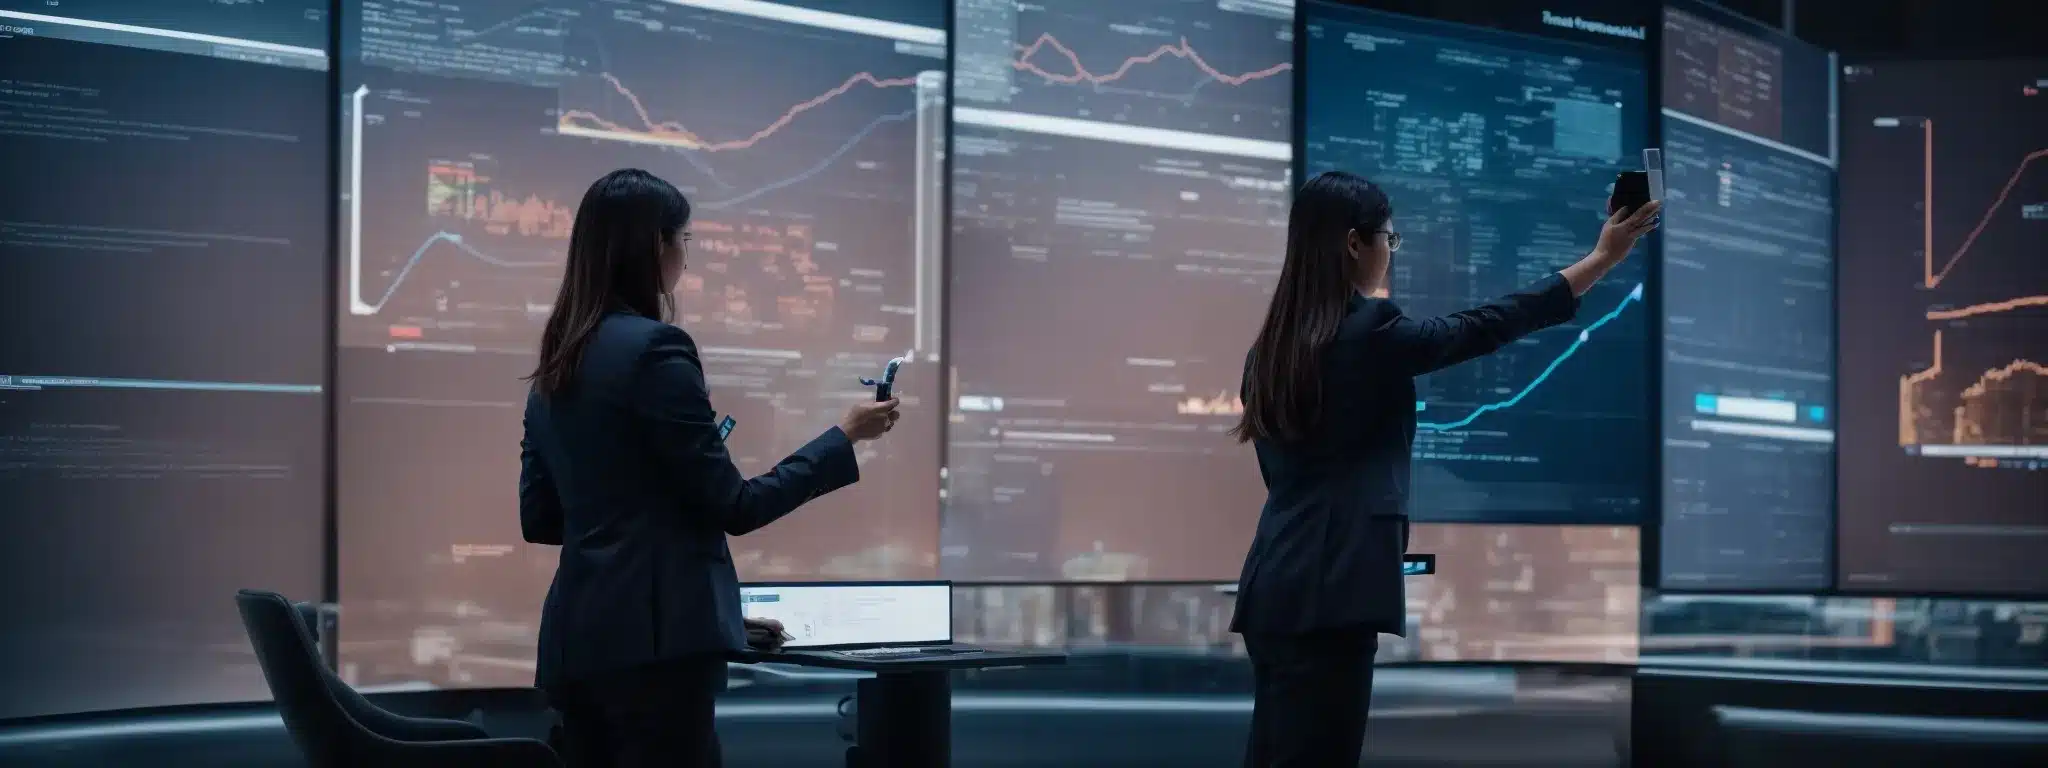 A Marketing Professional Taps On A Large, Glowing Screen, Orchestrating An Email Campaign With Visual Analytics Surrounding Them In A Futuristic Command Center.